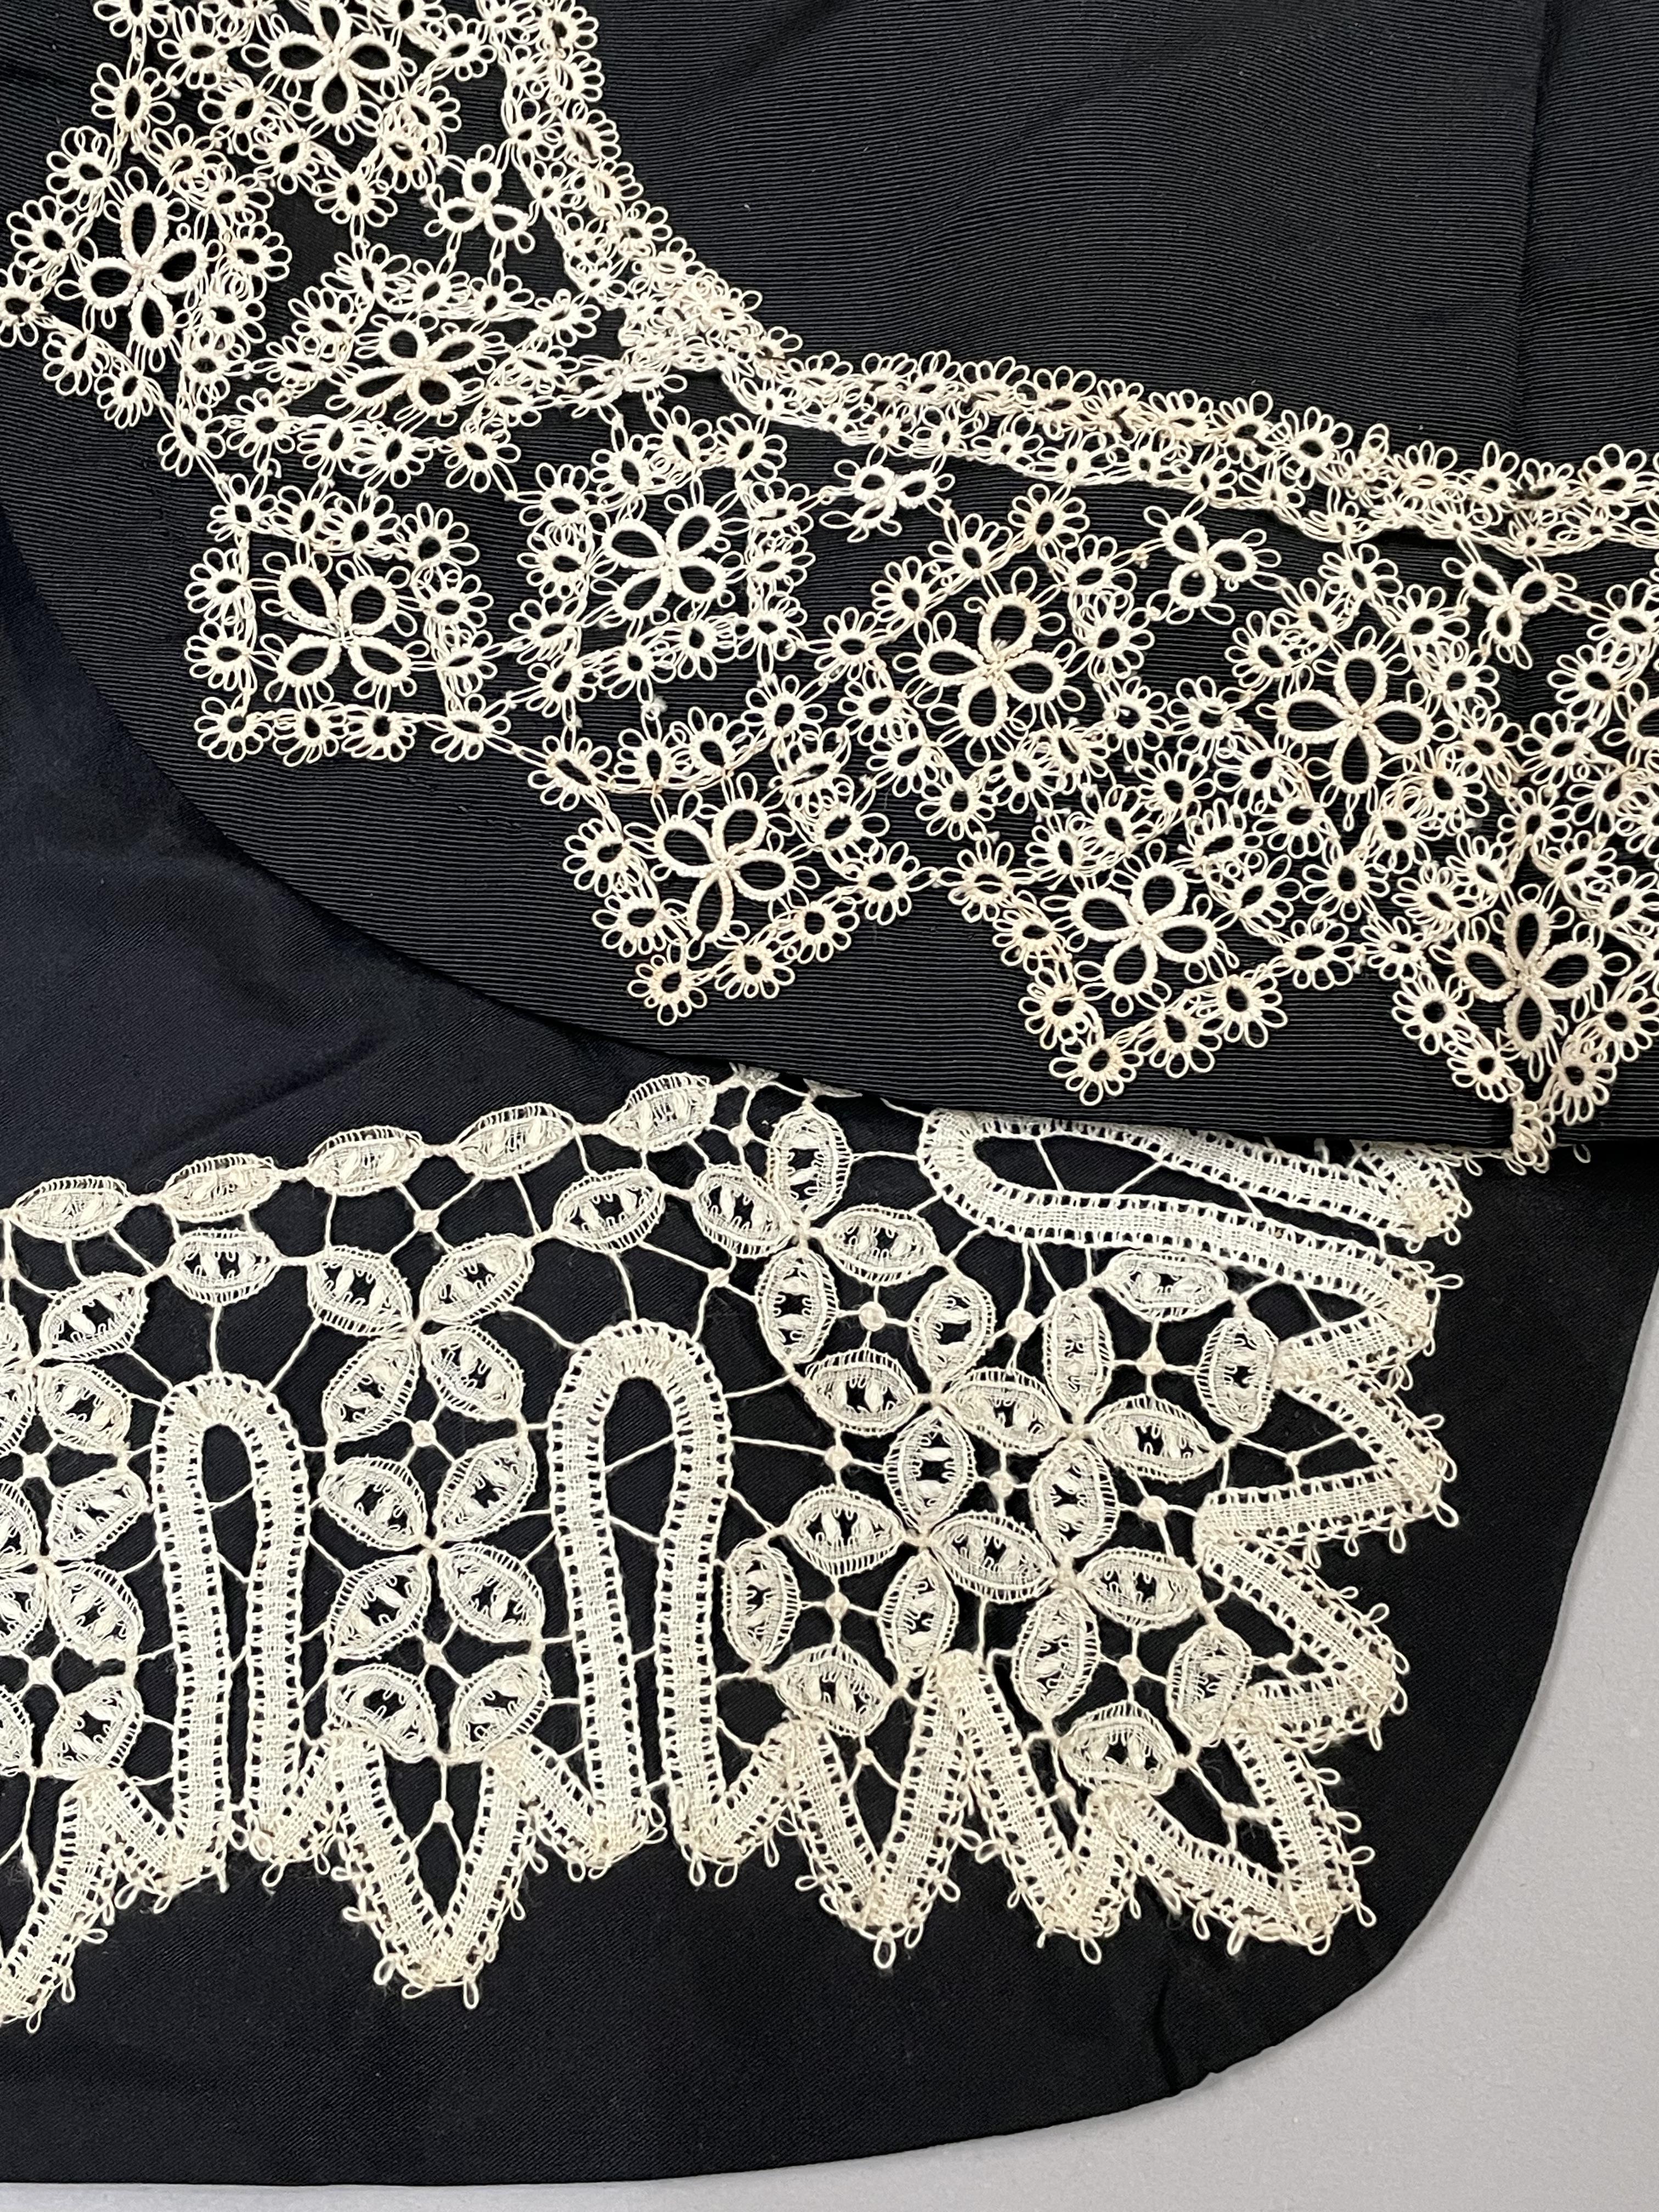 Antique lace: a large quantity of old lace; together with a boxed needle case in dark oak by Booth - Image 3 of 4